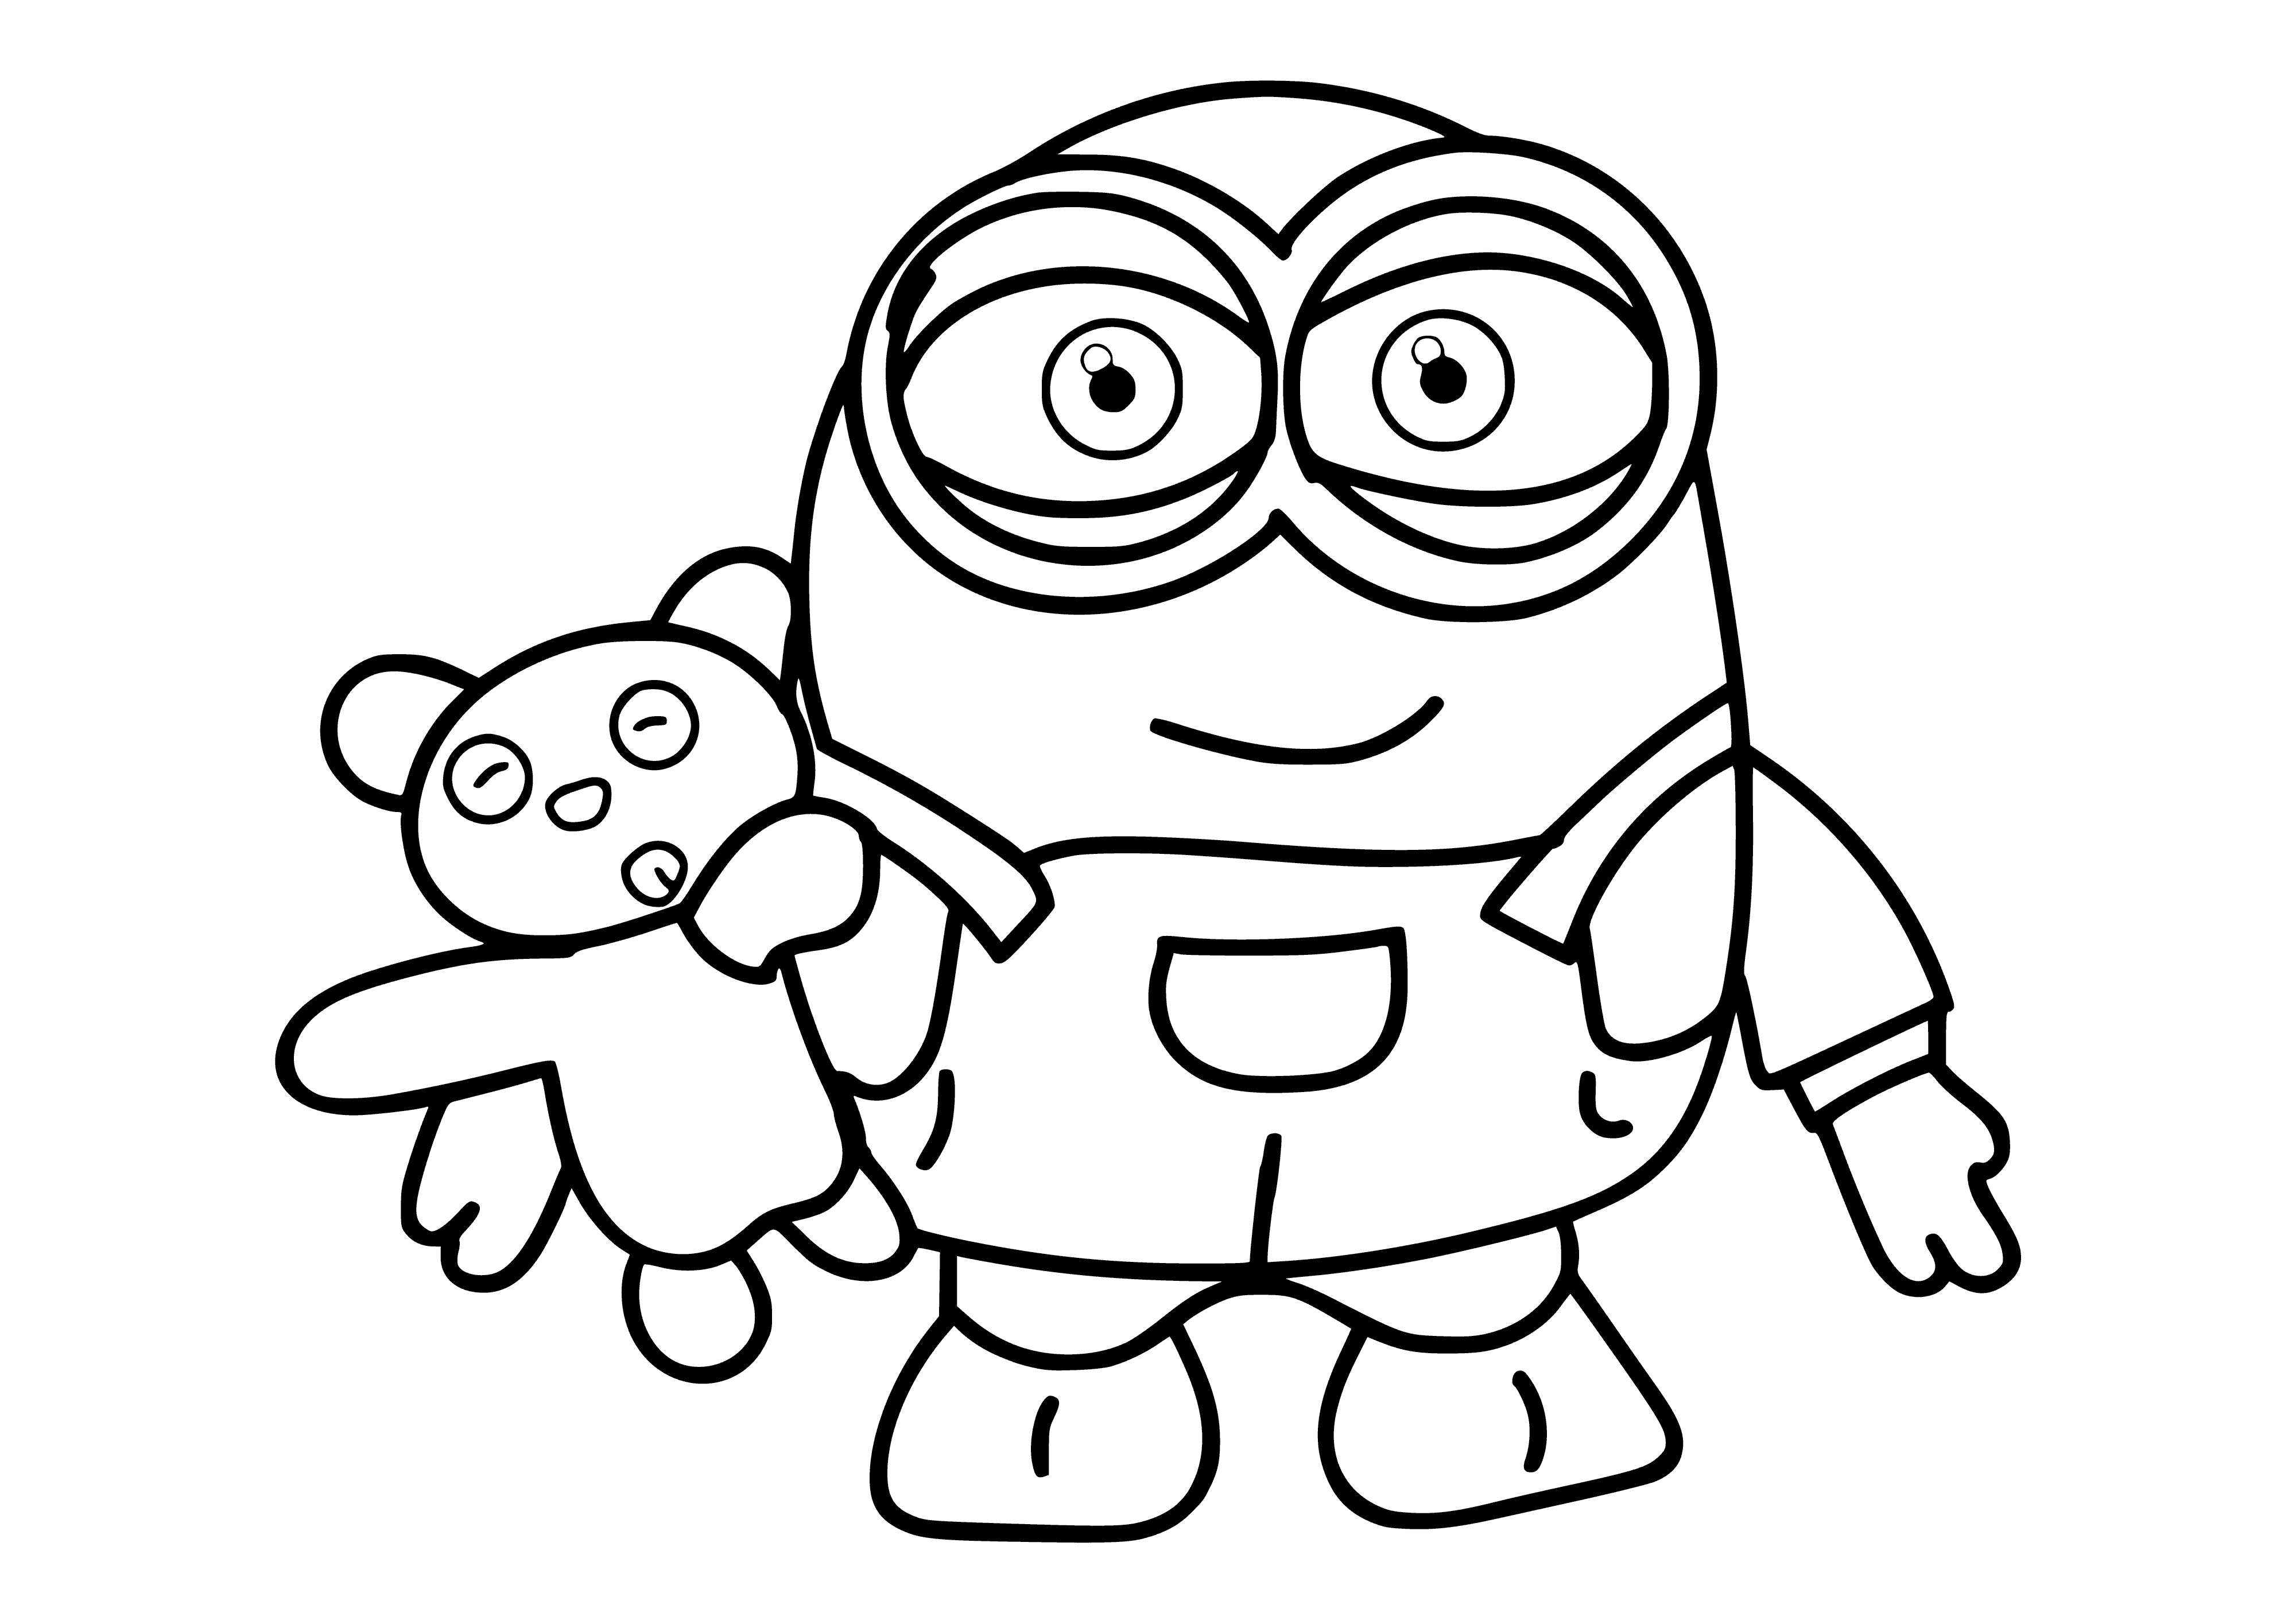 coloring page: Bob, a bald, yellow Minion with two big eyes, holds a banana in his left hand and wears blue overalls.